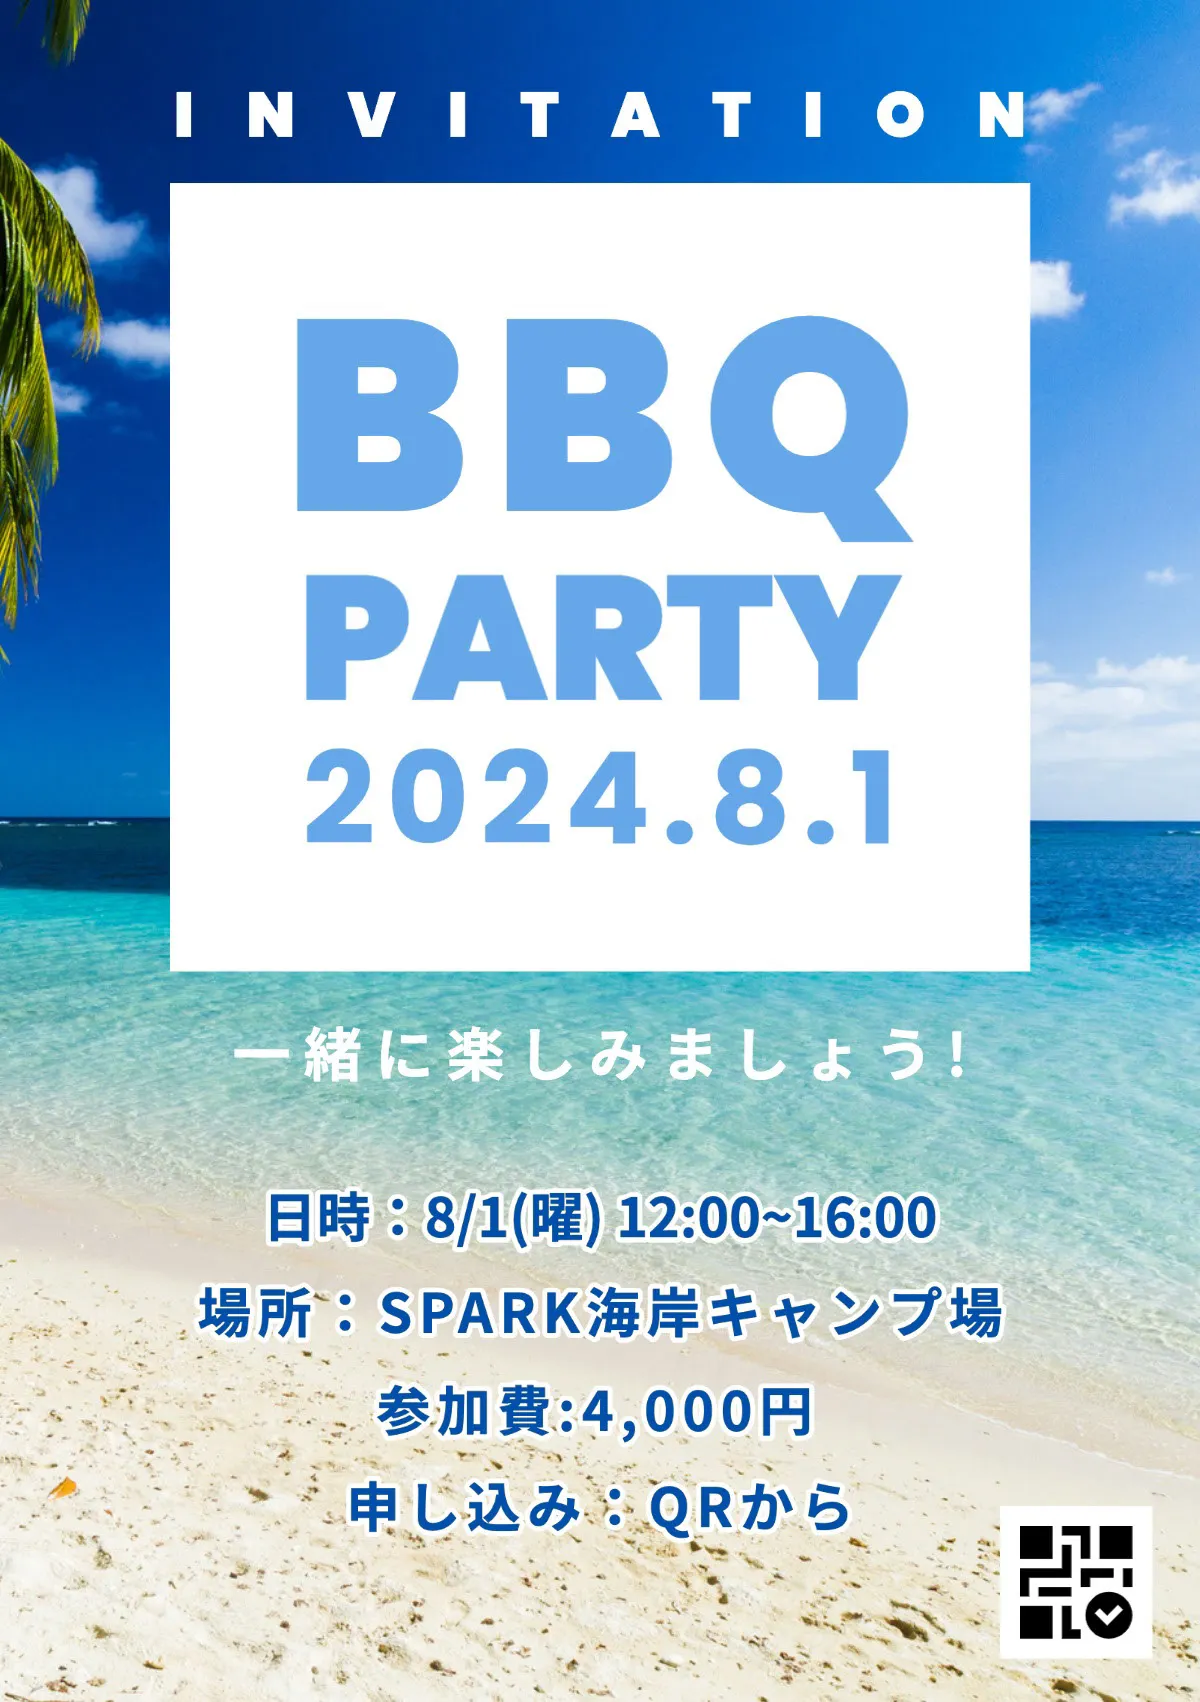 Invitation to the BBQ party